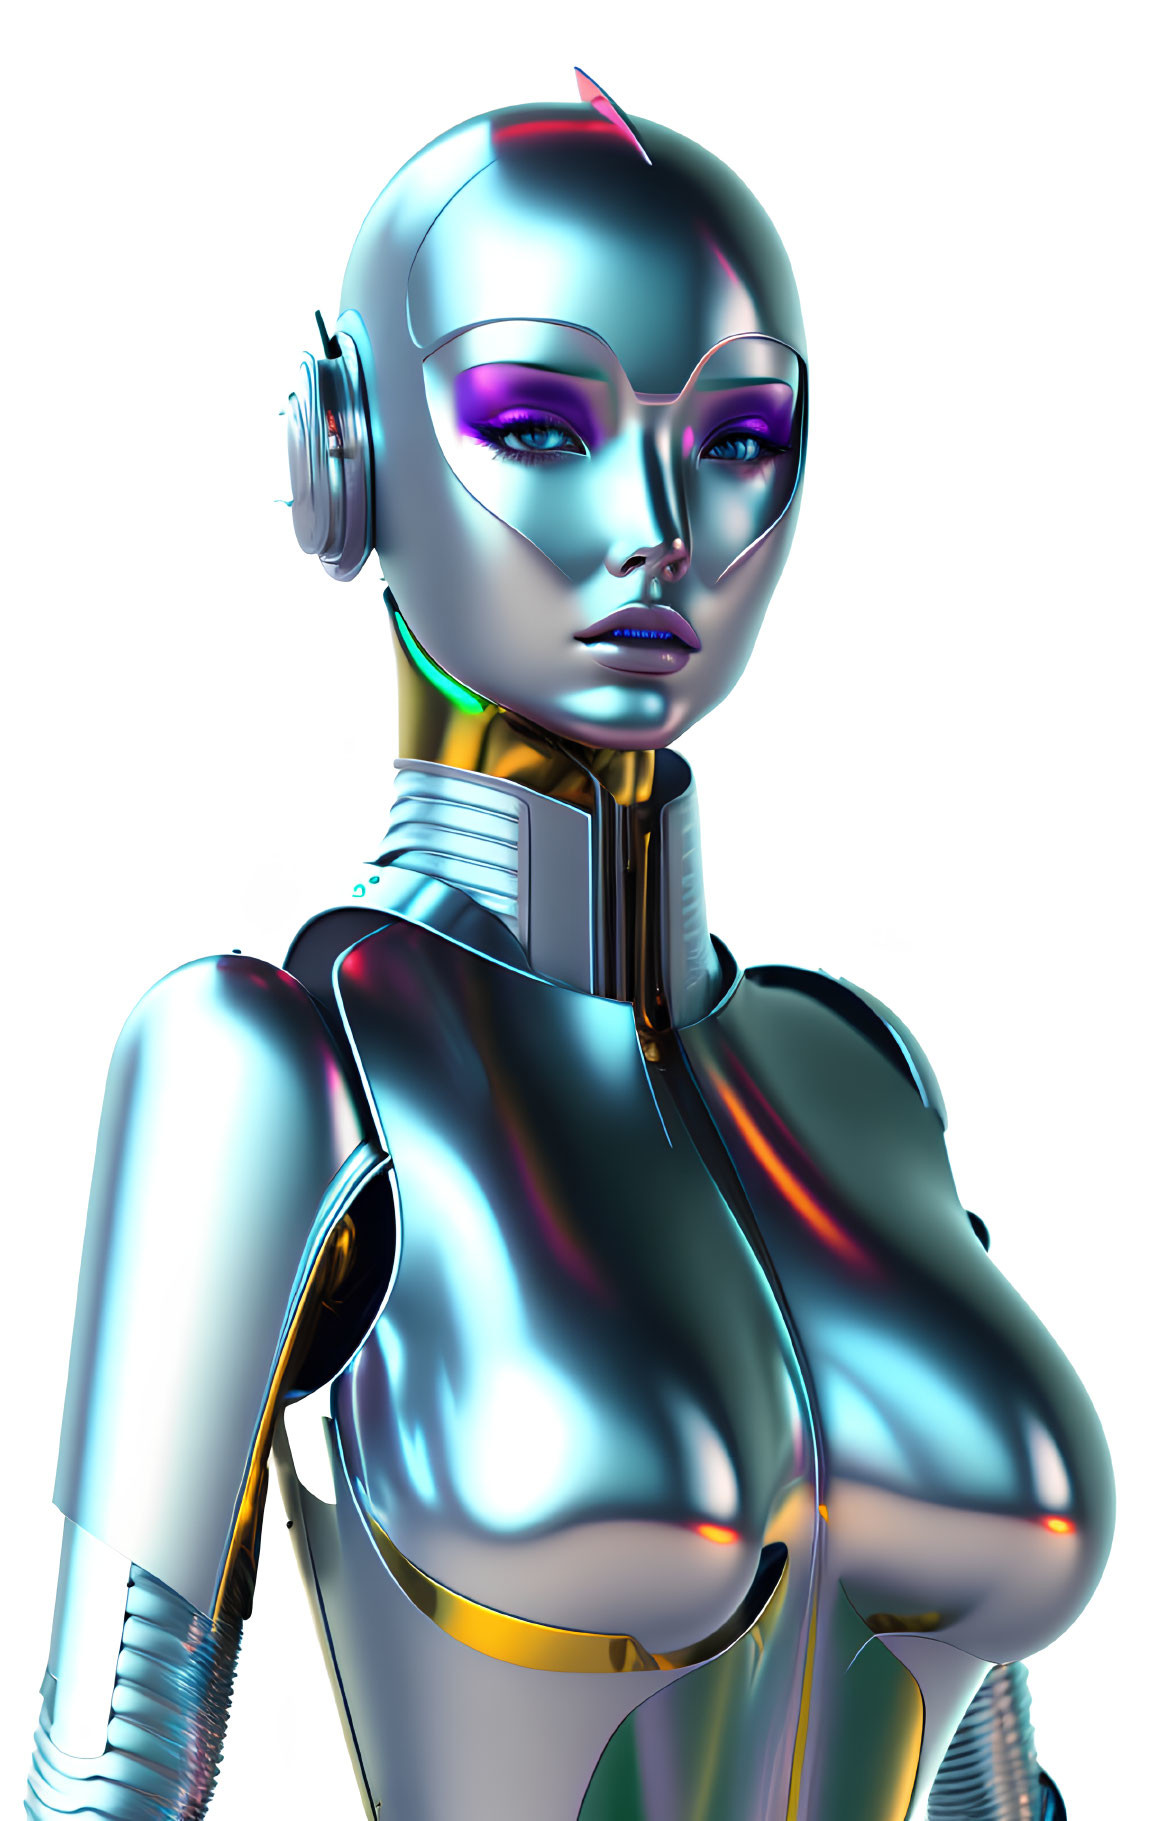 Futuristic female humanoid robot with glossy metallic surface and purple-tinted eyes